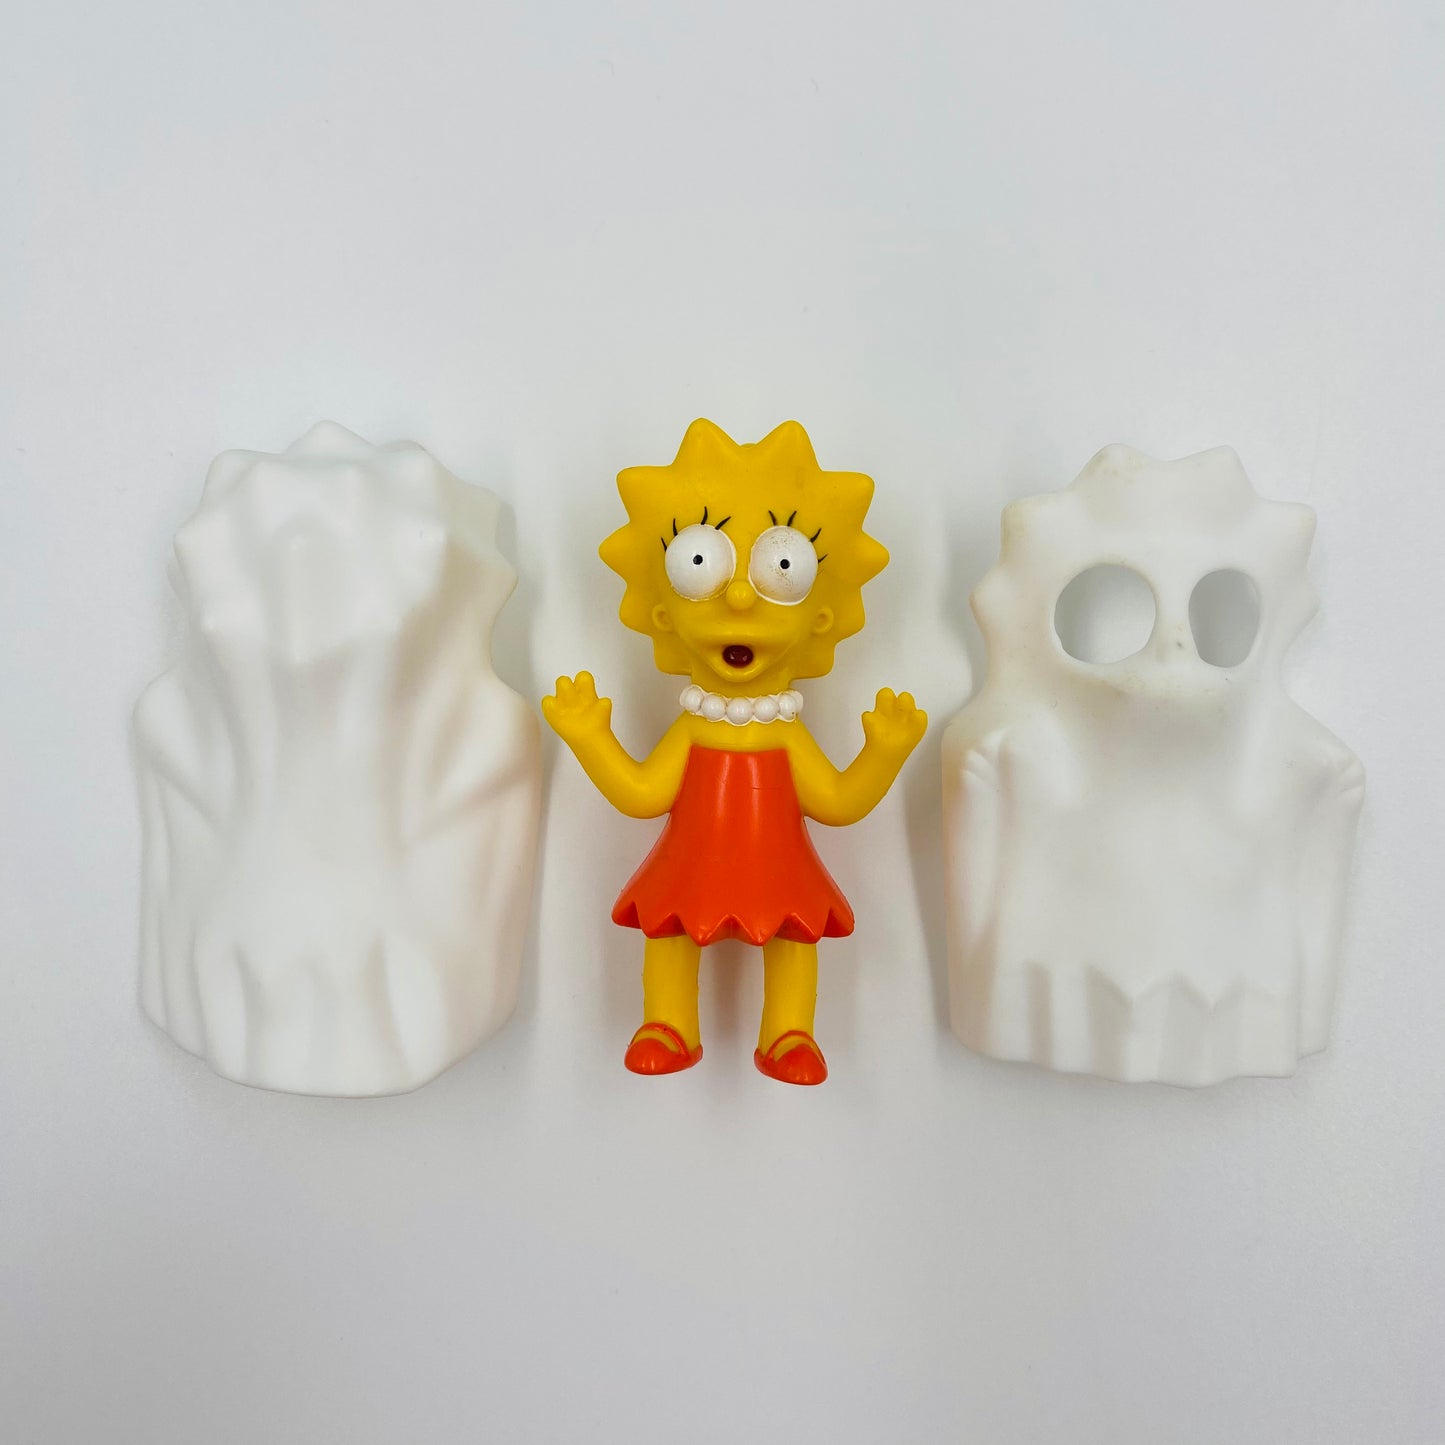 The Simpsons Spooky Light-Ups Lisa & Snowball II Burger King Kids' Meals toy (2001) loose